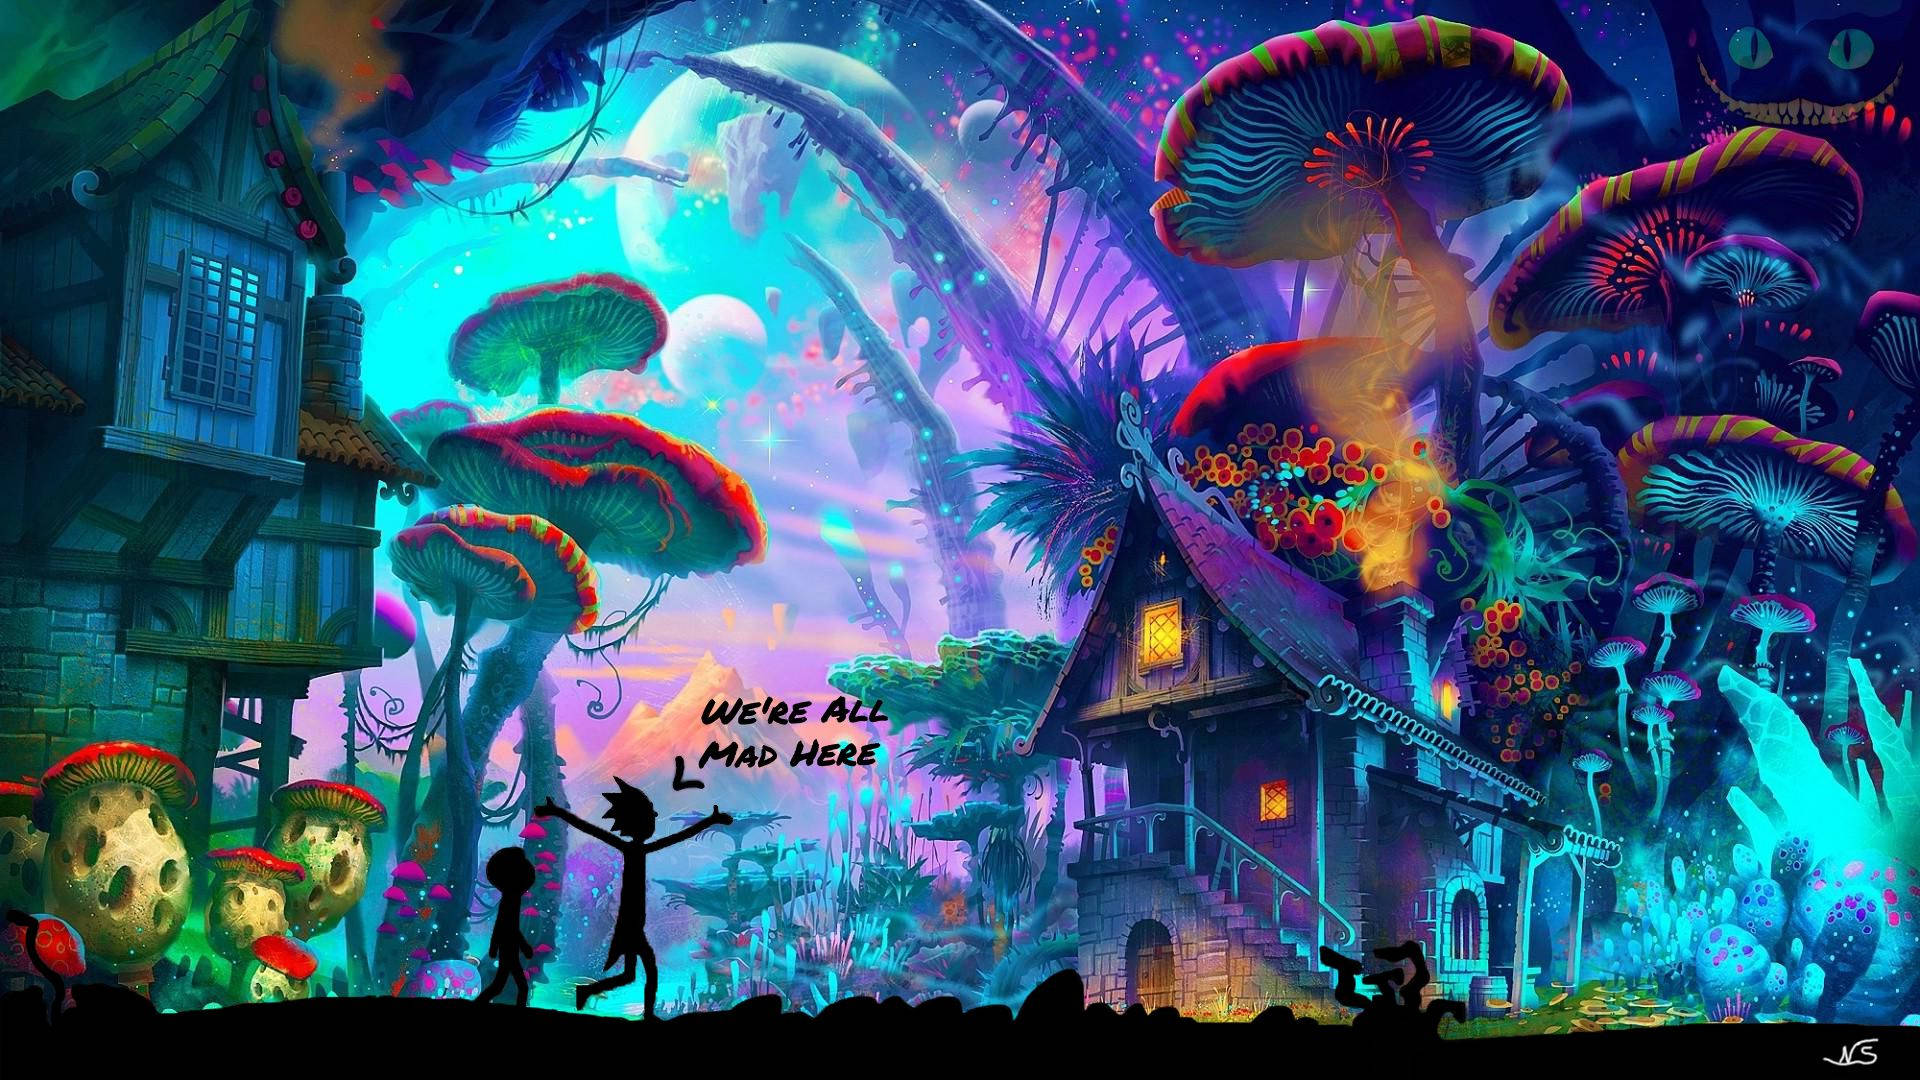 Rick And Morty Stoner World With Giant Mushrooms